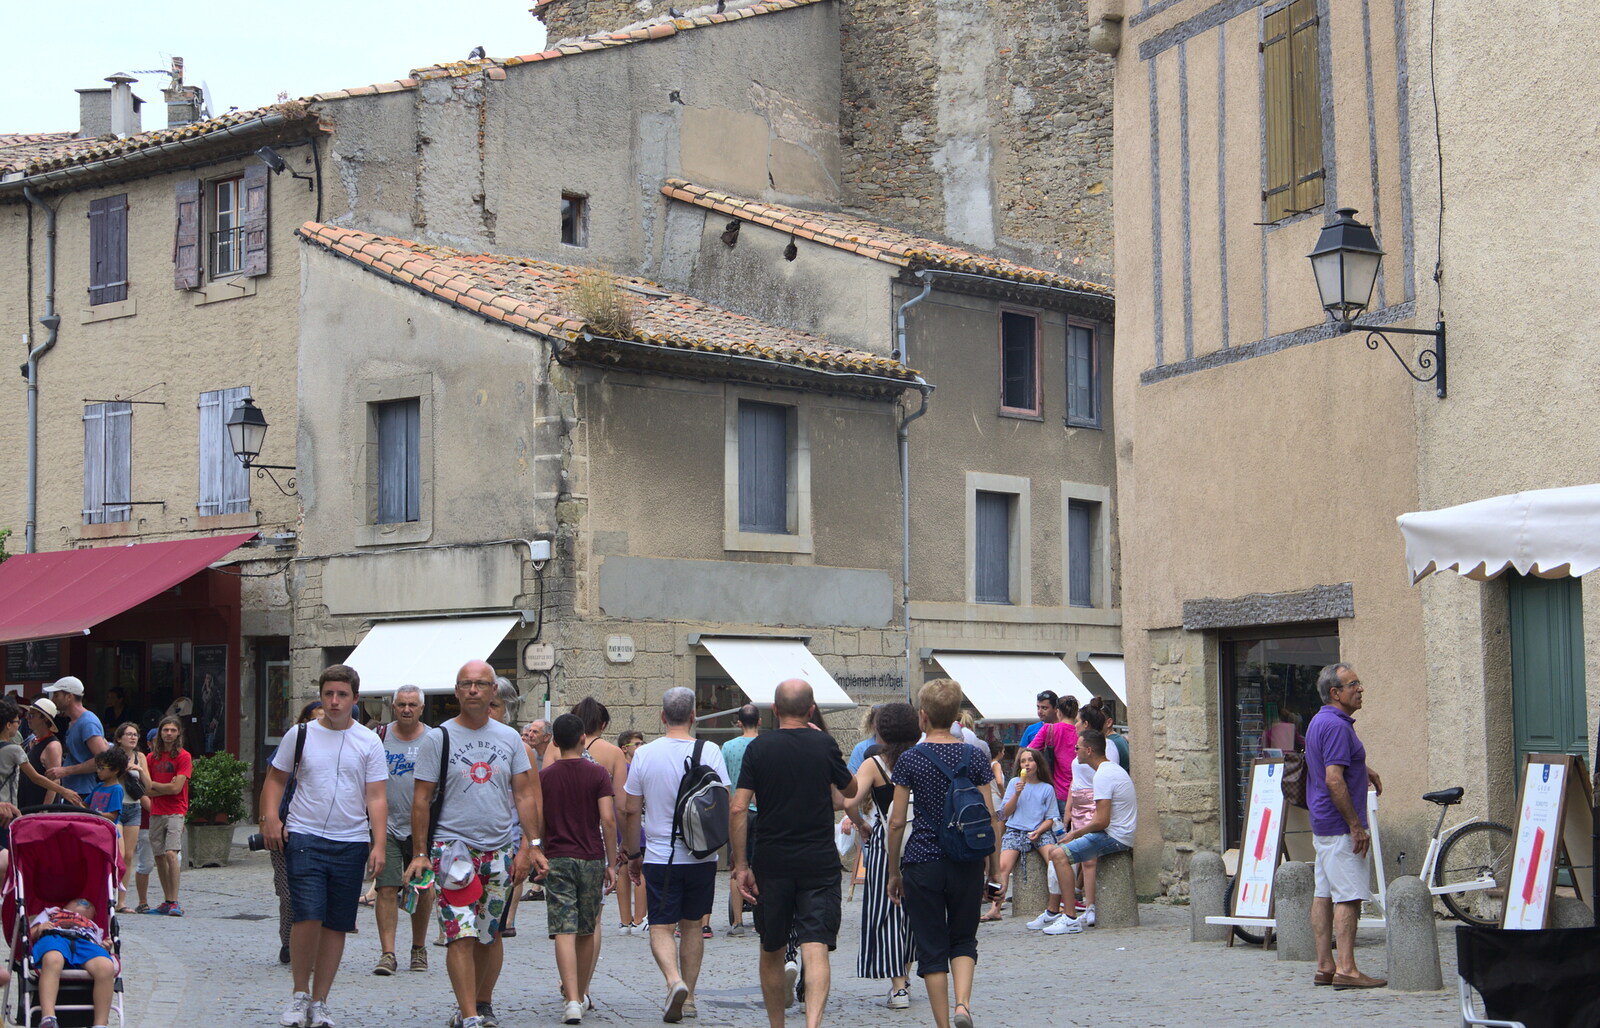 Tourists mill around from A Trip to Carcassonne, Aude, France - 8th August 2018